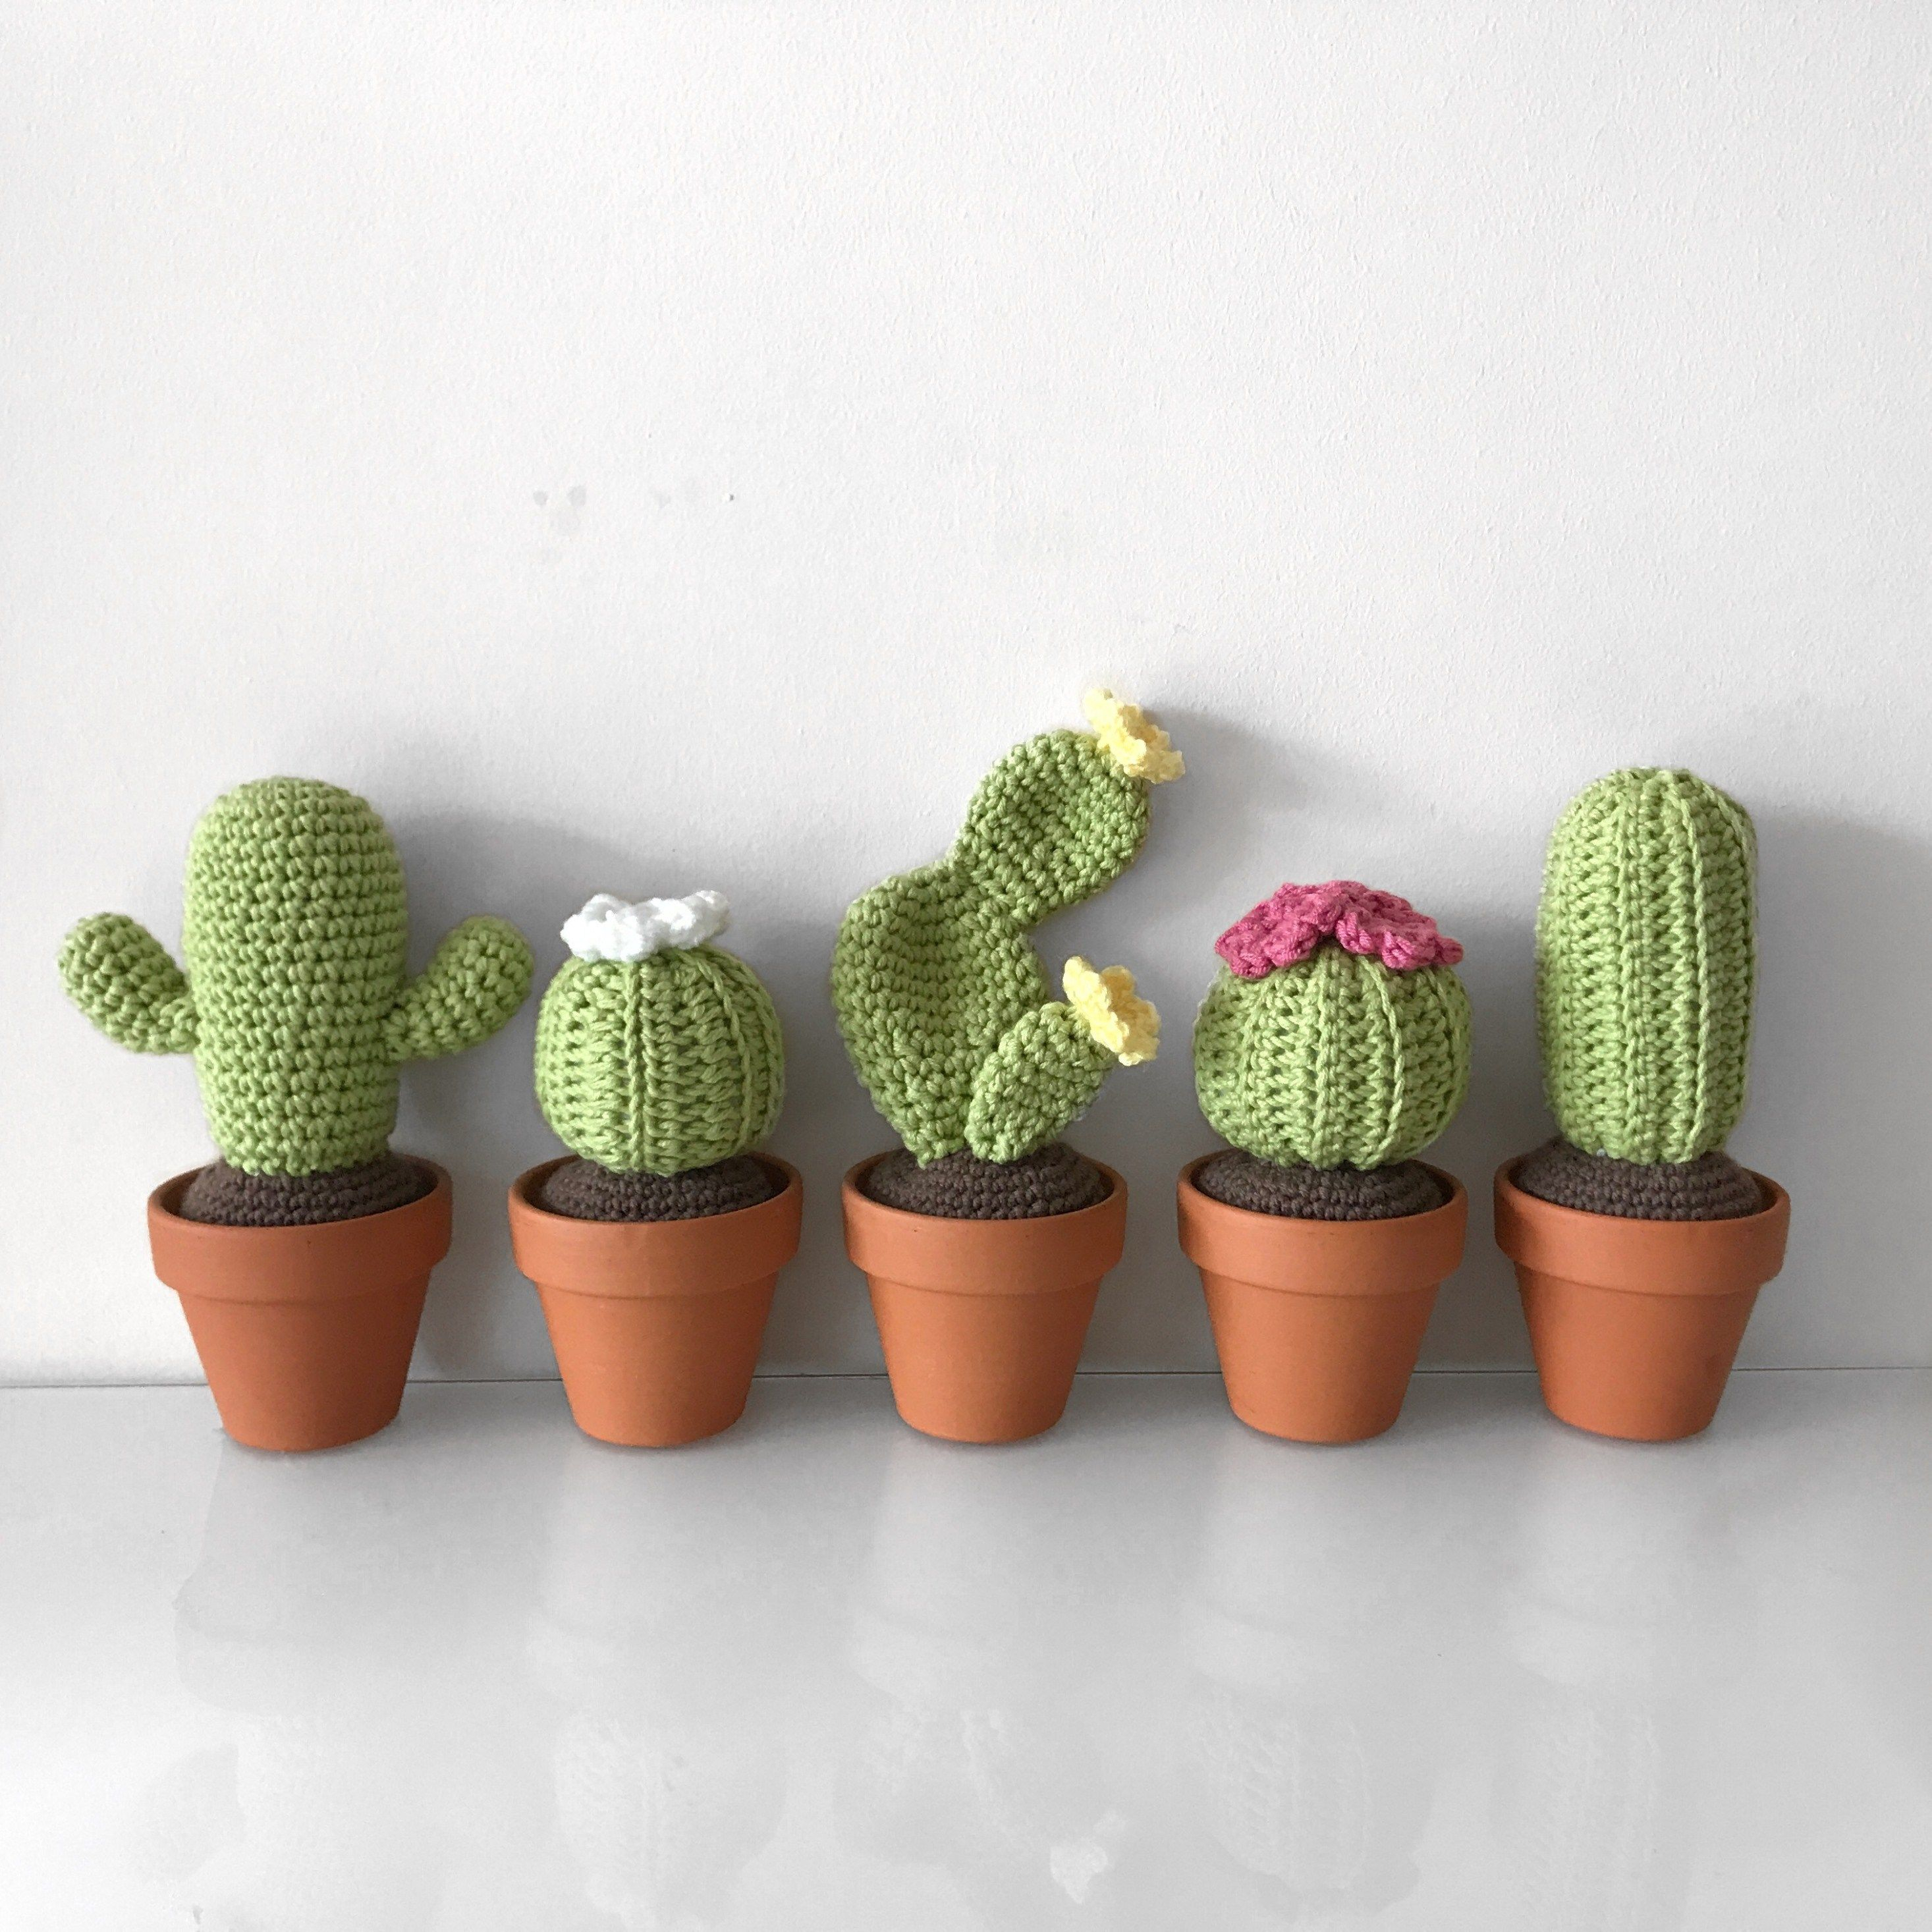 Crochet Cactus Pattern In This 4 Part Mini Series I Will Be Giving You 4 Detailed Posts On